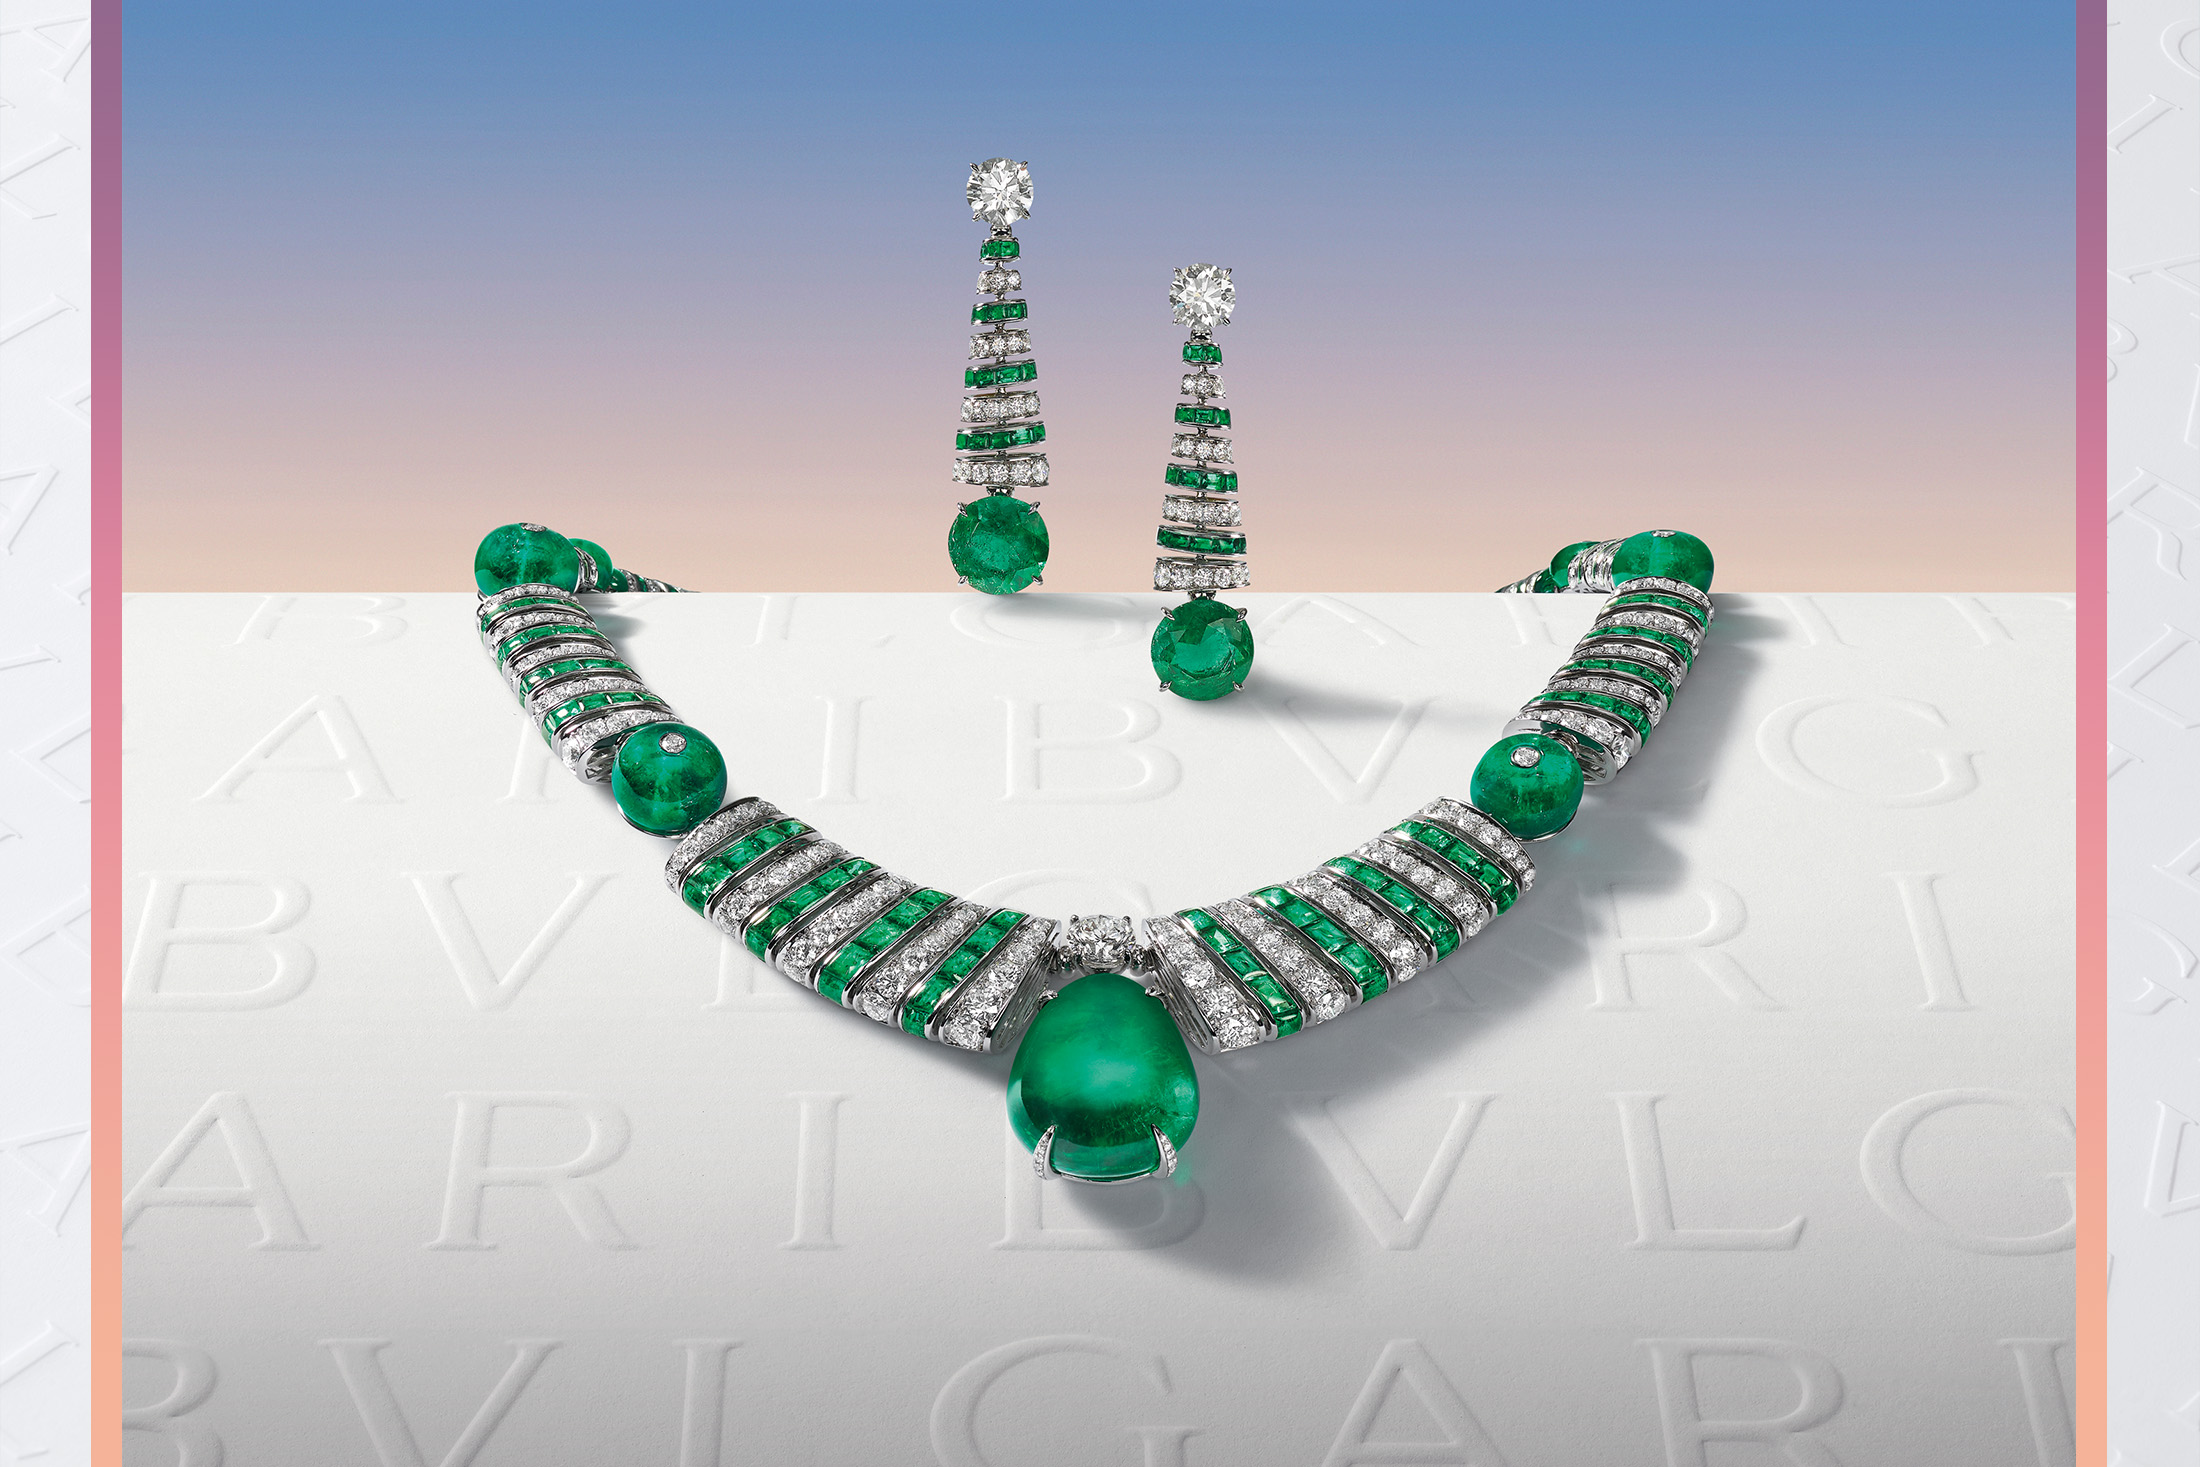 See How Bulgari Created a 93.83-Carat Emerald Necklace Worn by